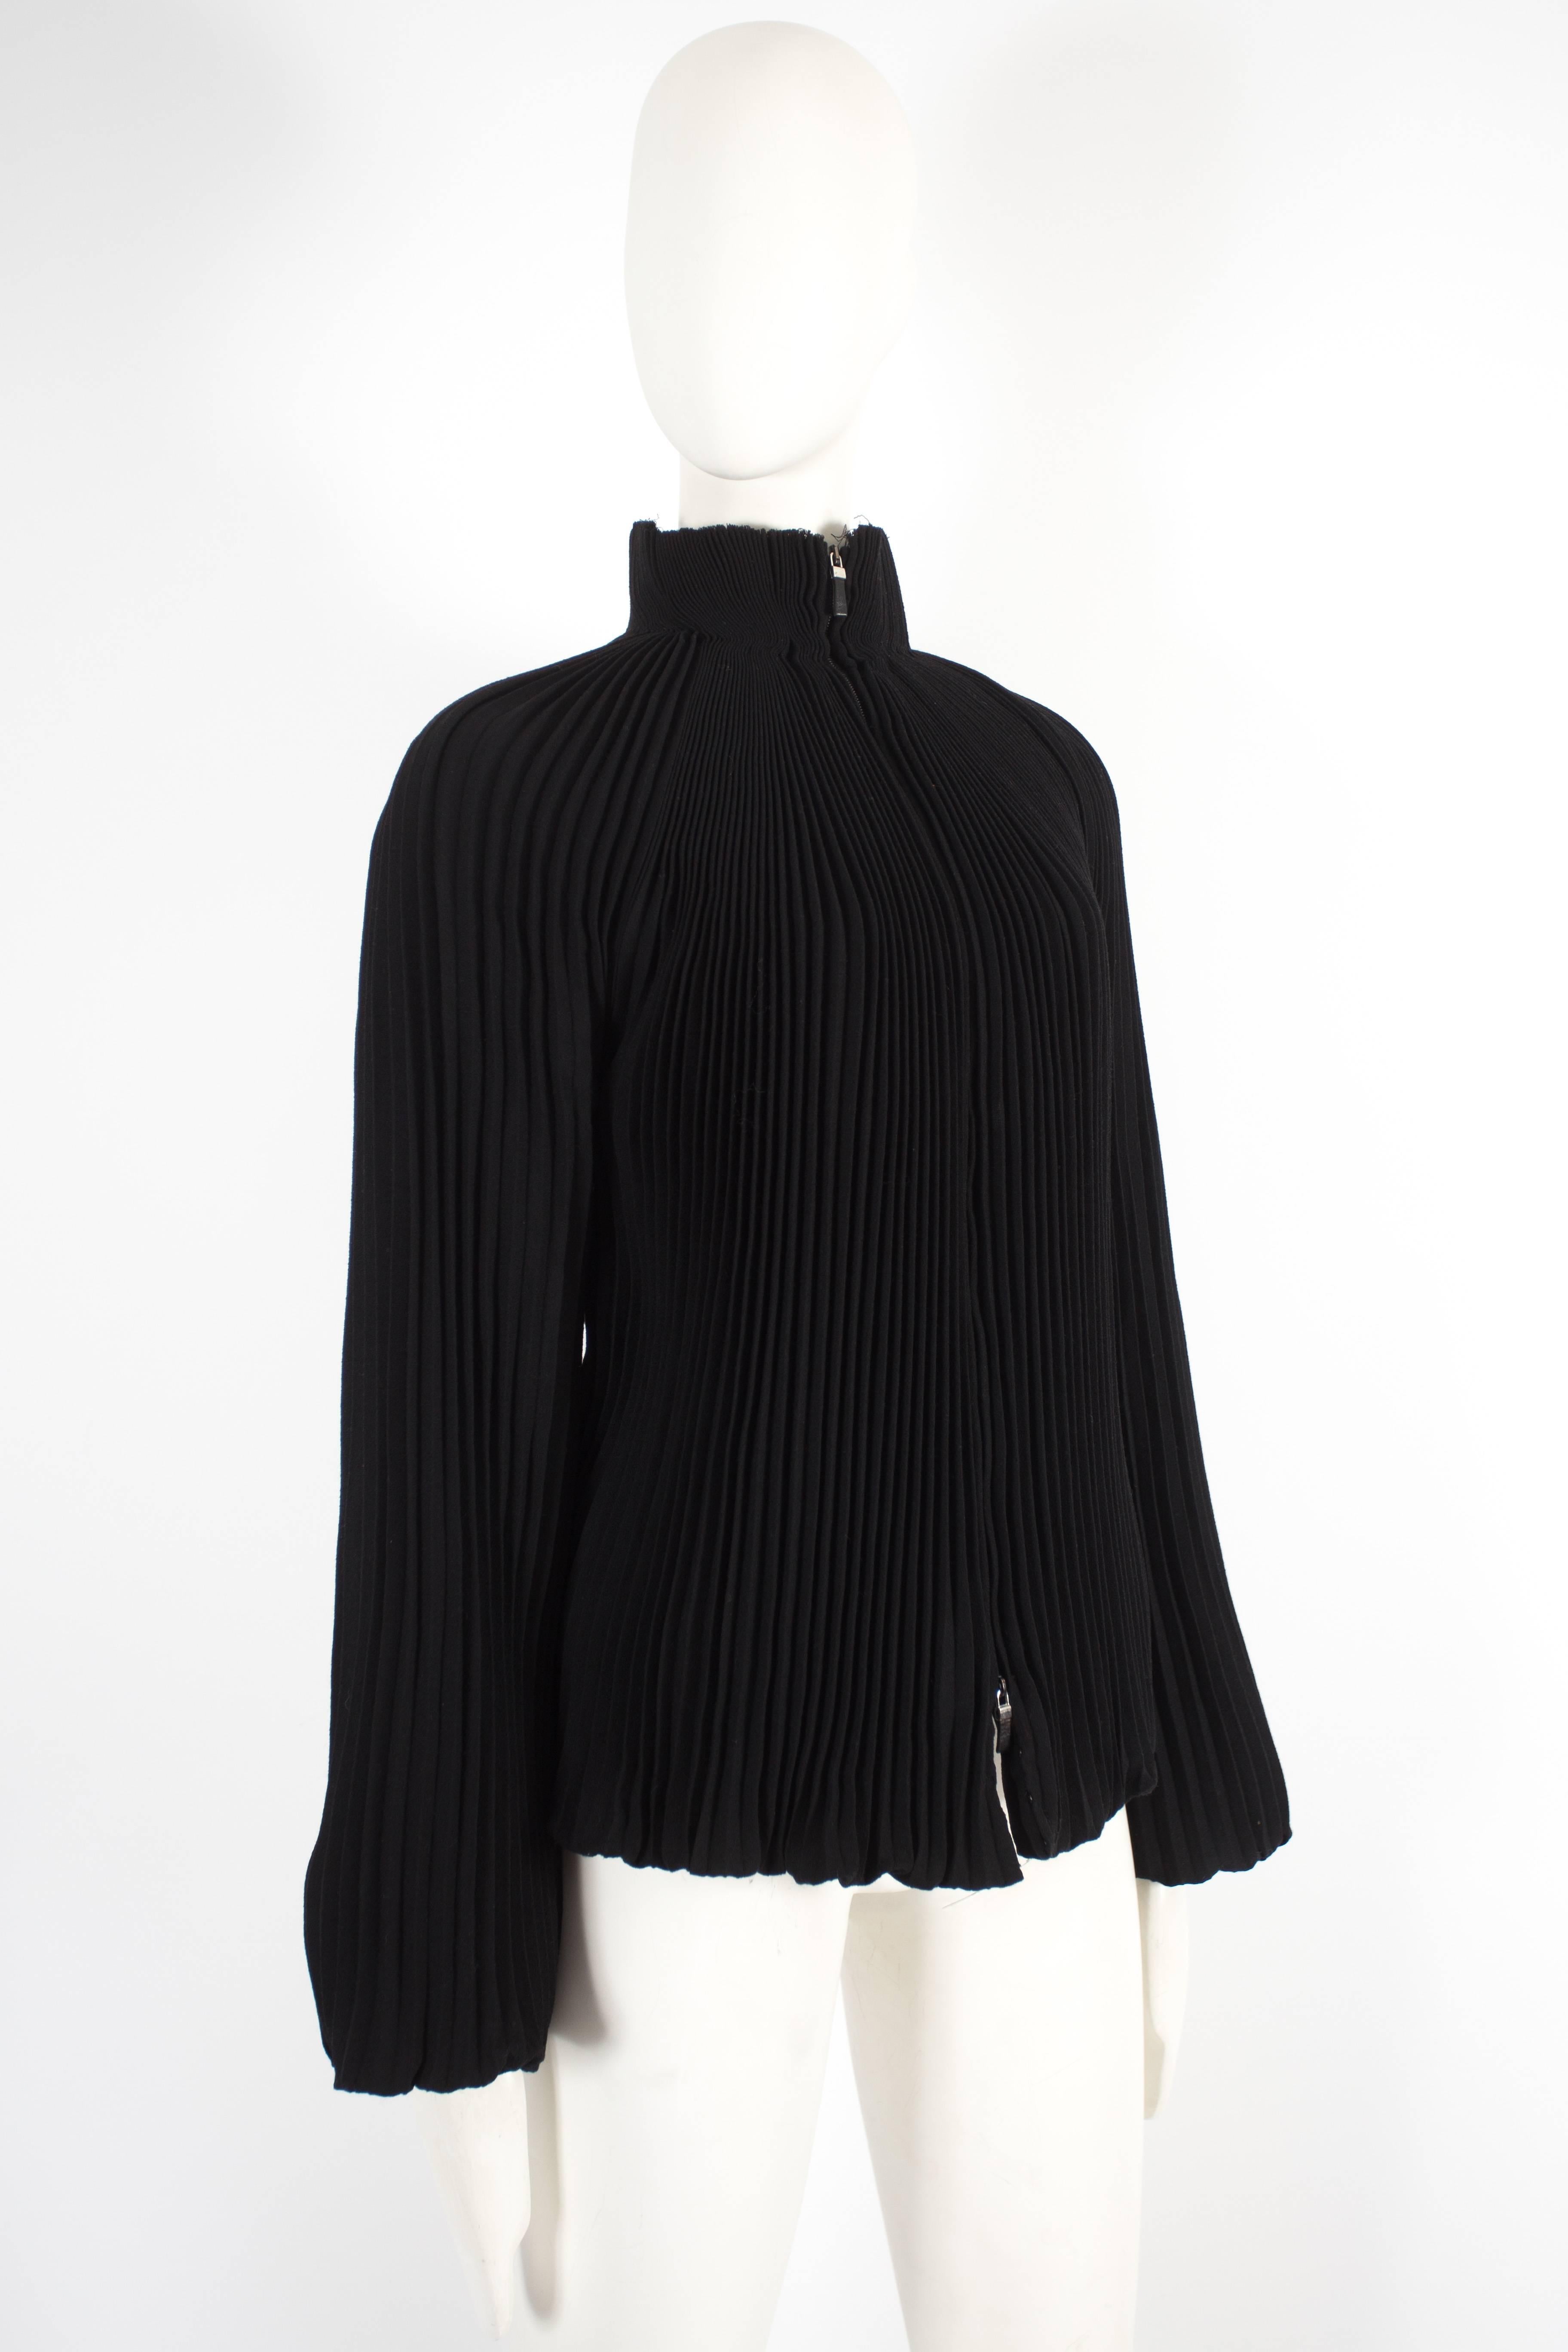 Alexander McQueen black pleated wool jacket, fw 2004 In Excellent Condition For Sale In London, GB